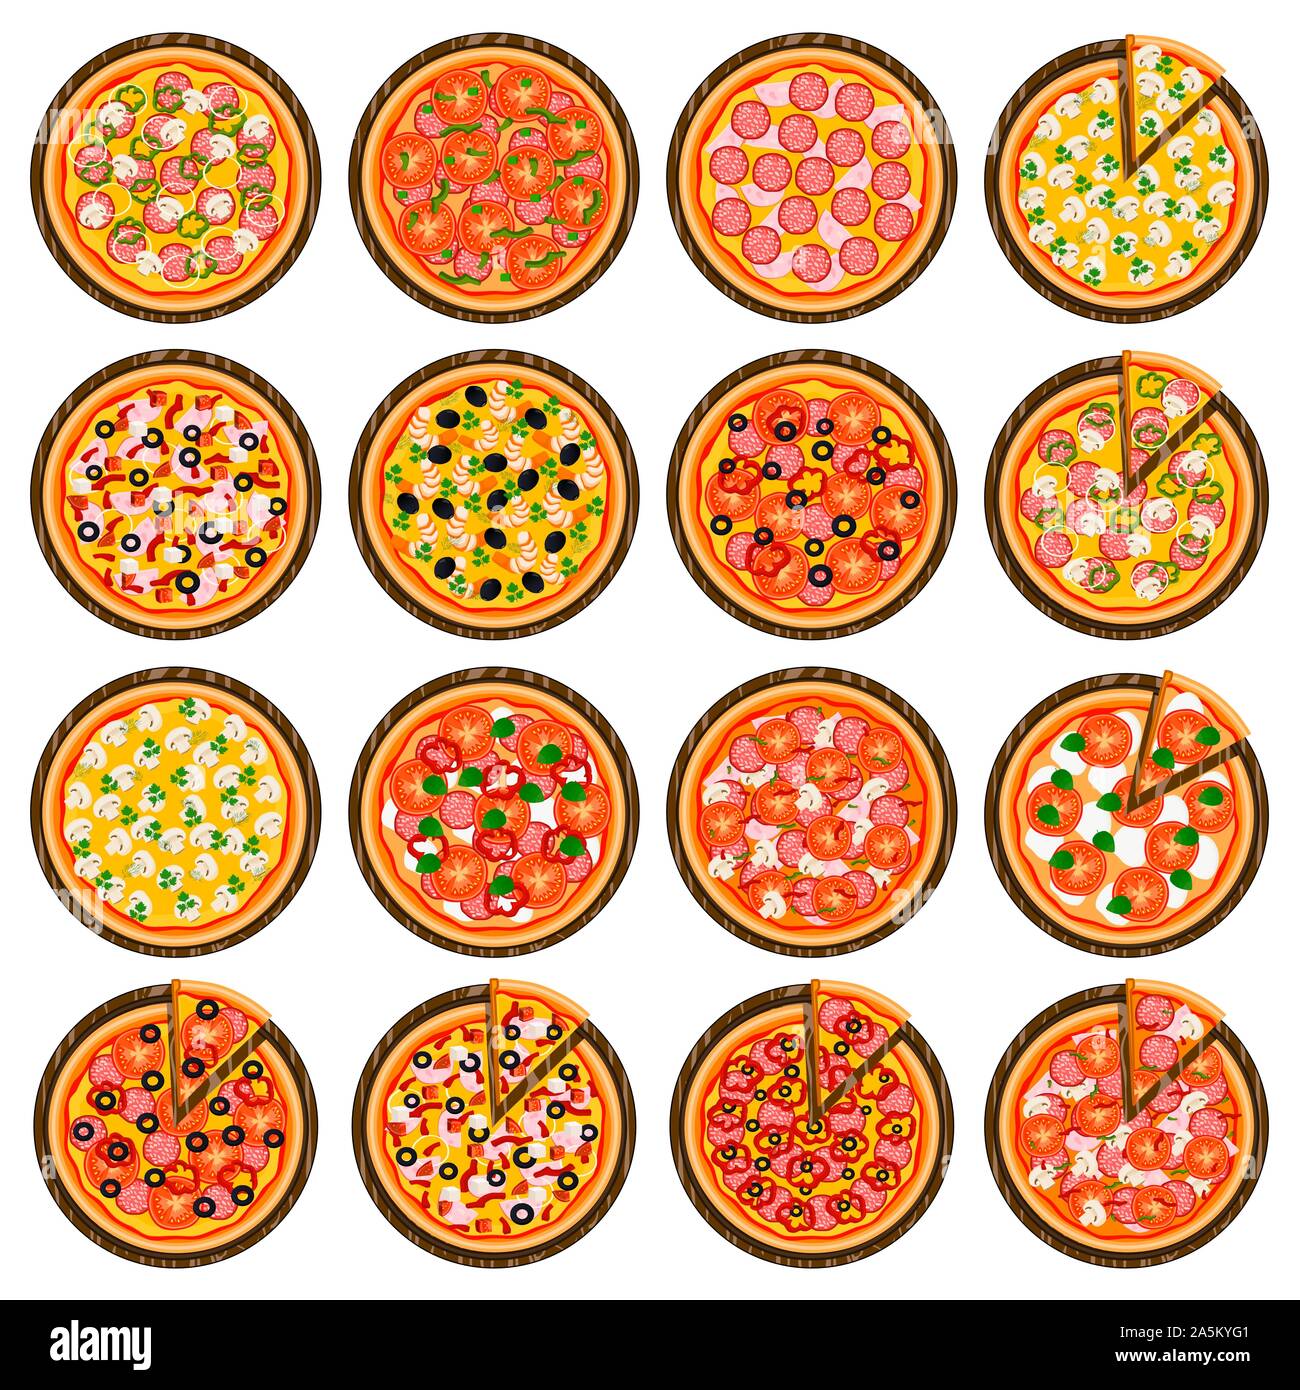 Big colorful set for whole round hot pizza, slice triangle to pizzeria menu. Pizza on wood board, ingredients various size for pizzeria to chalkboard. Stock Vector